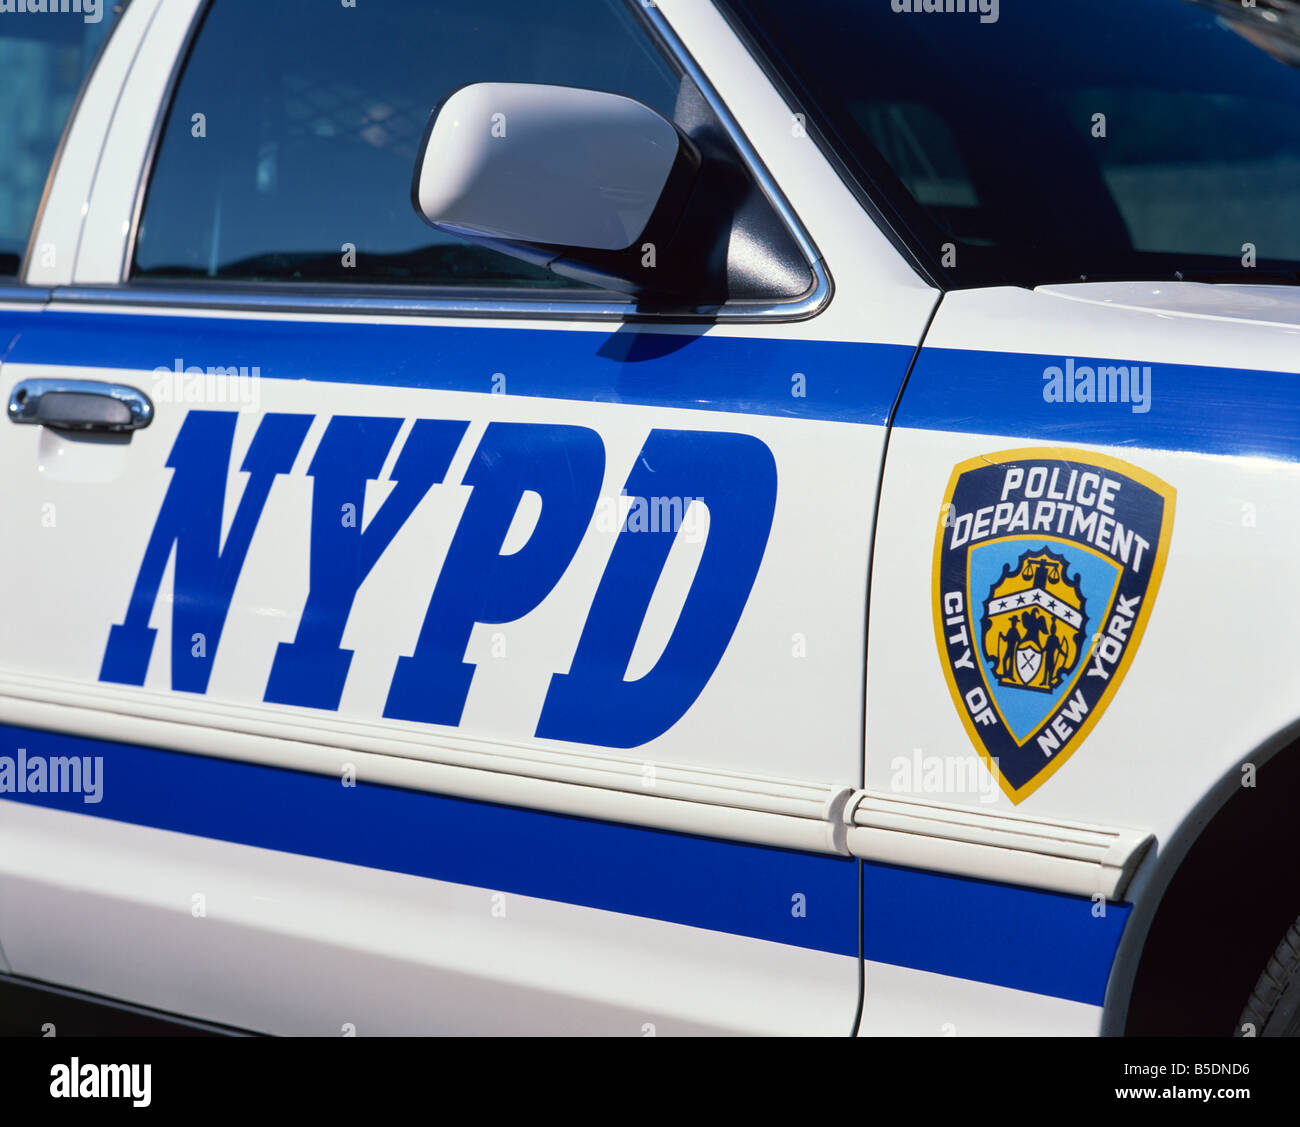 Close-up of police car with insignia of the City of New York Police Department, NYPD, on the side, in New York, USA Stock Photo